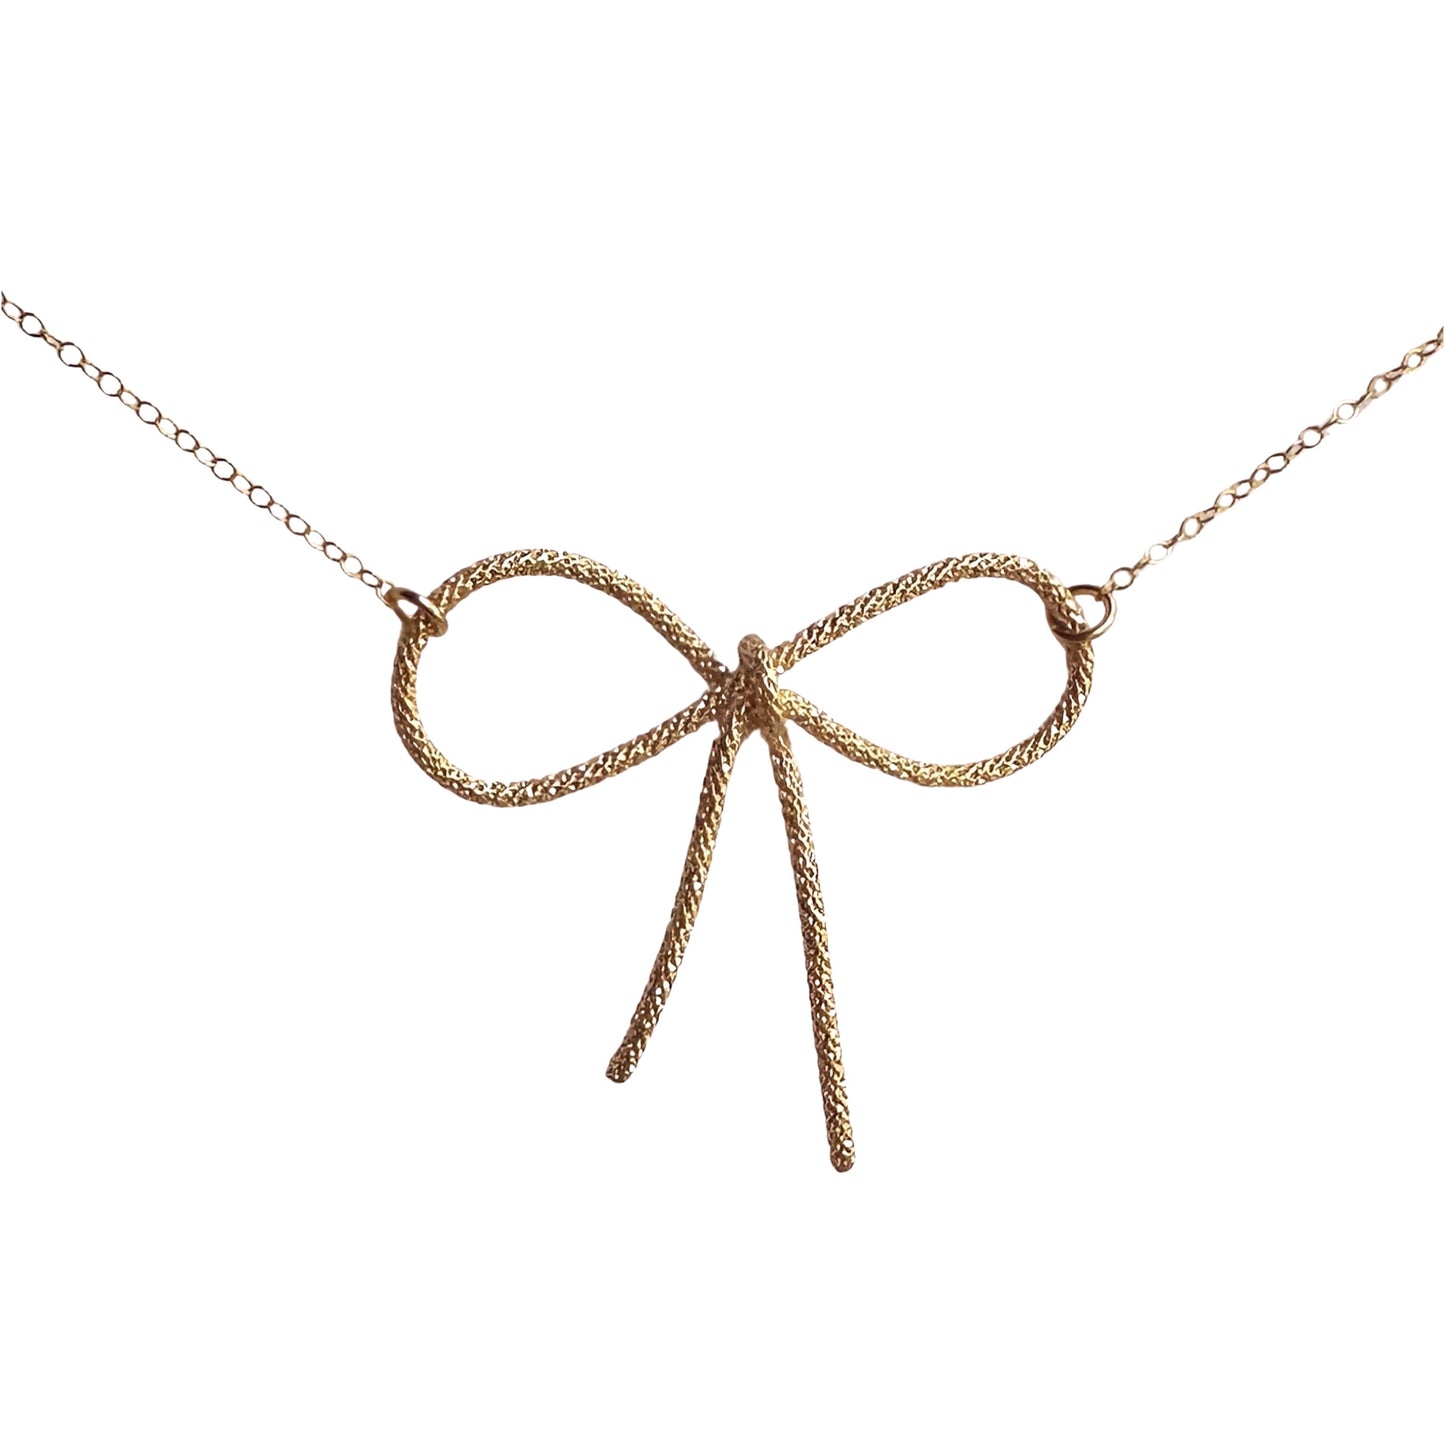 gold sparkle wire bow pendant necklace wire tied into a bow 2 inches across with dainty gold chain connecting onto each loop of the ribbon/bow